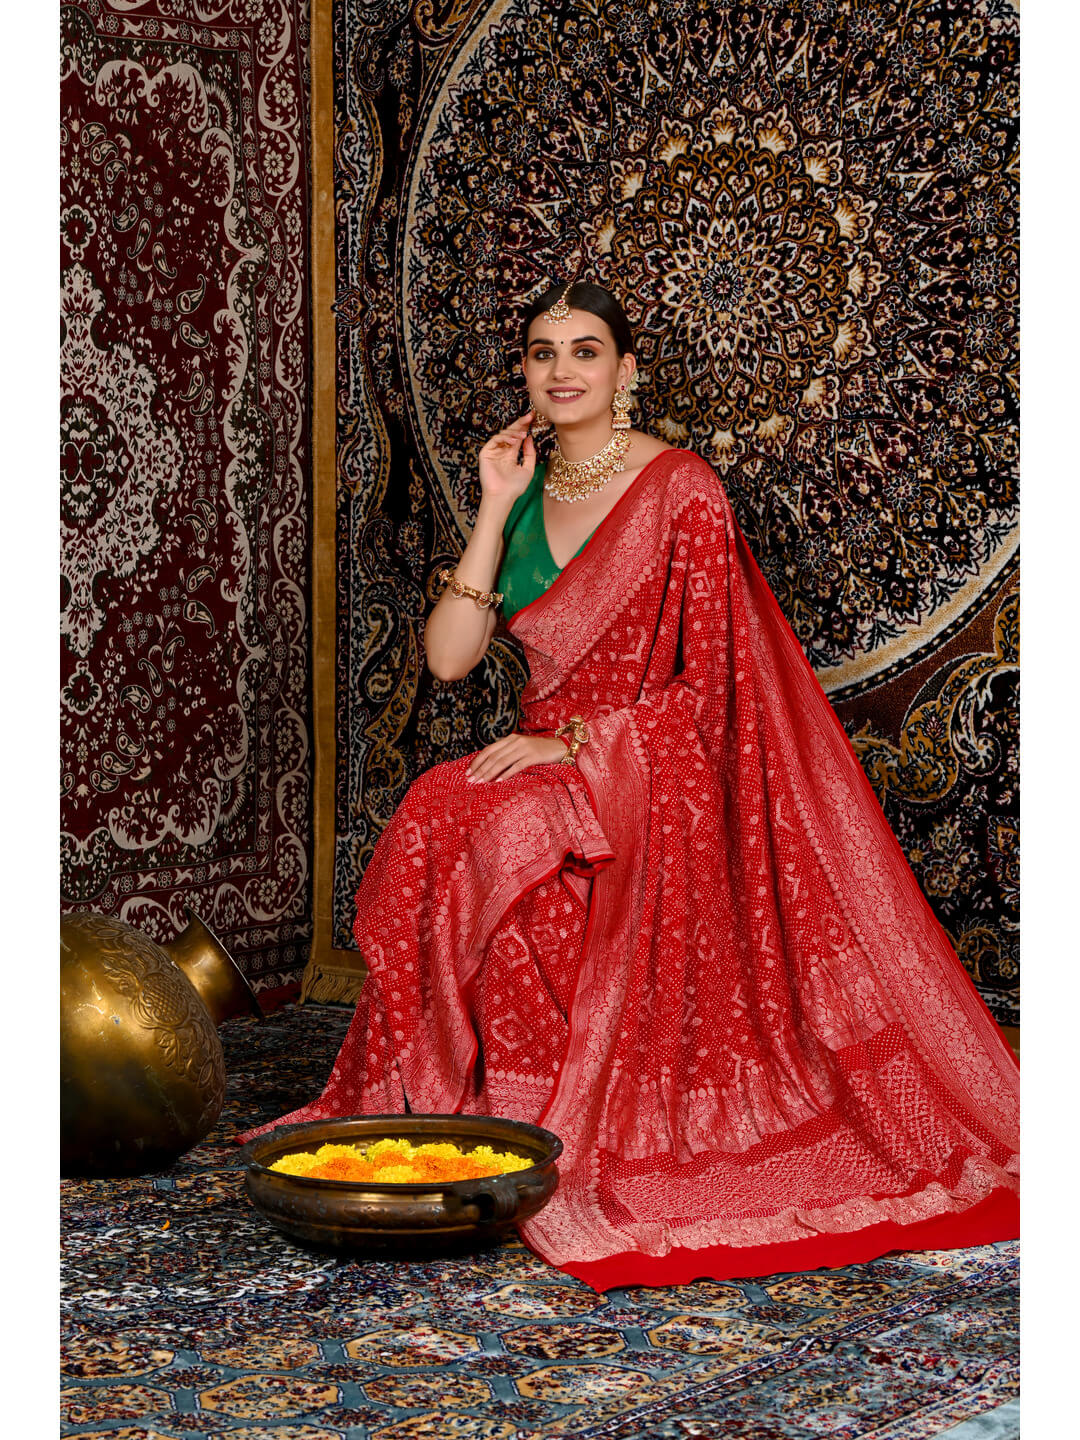 Red Bandhani Saree Blouse Designs Online With Best Price in India USA –  Sunasa